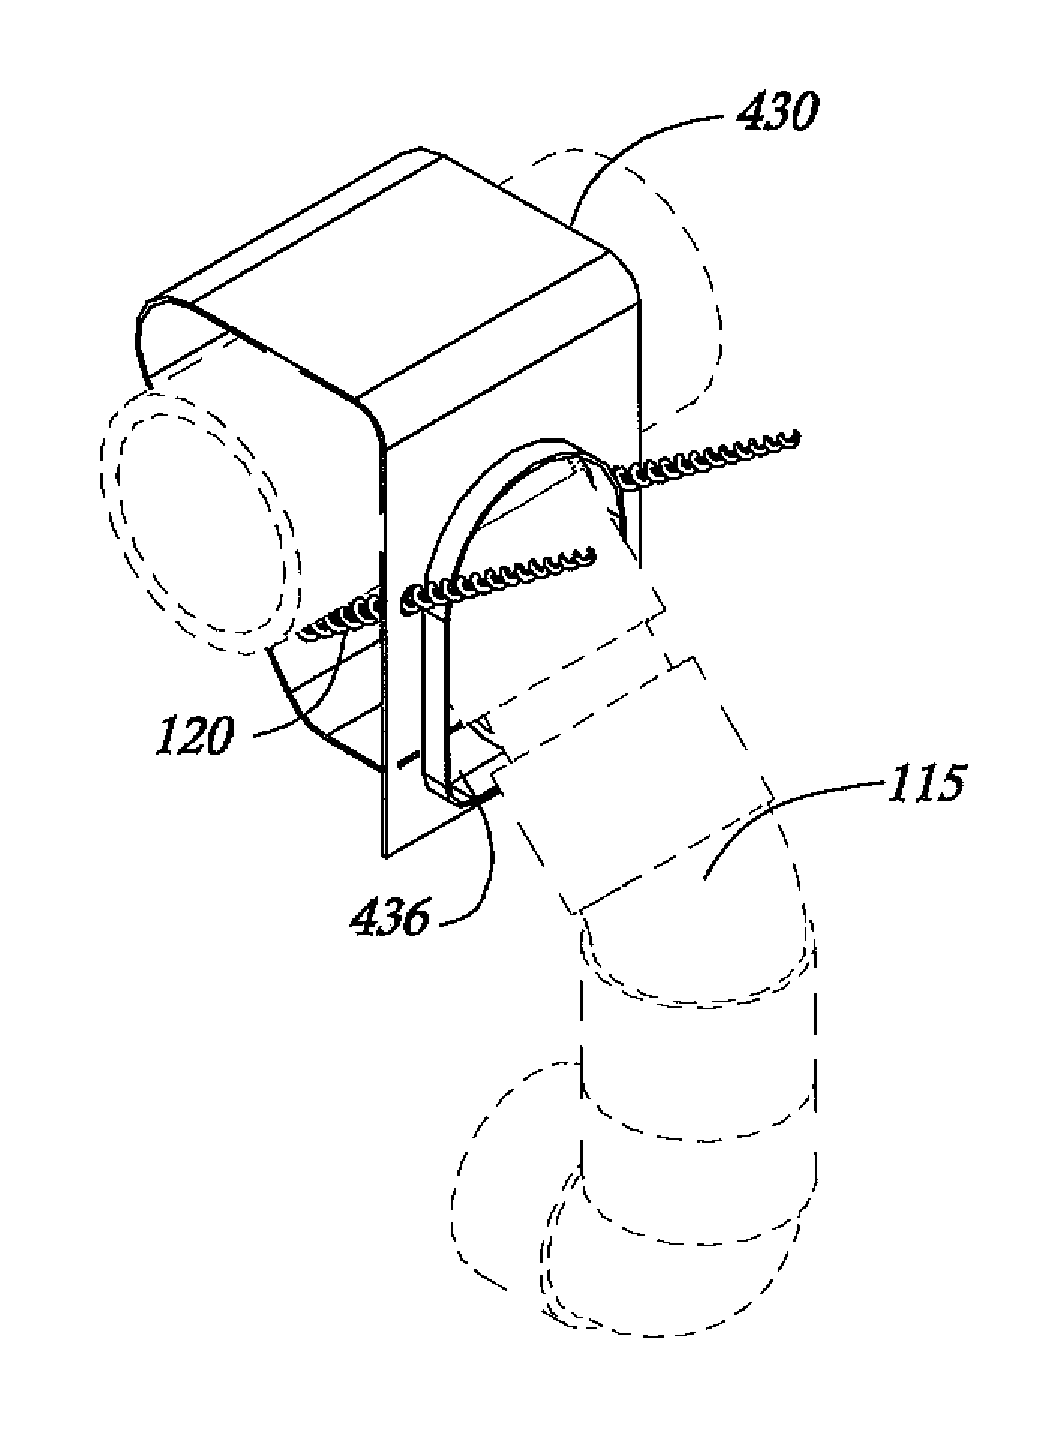 Sprinkler fitting attachment device